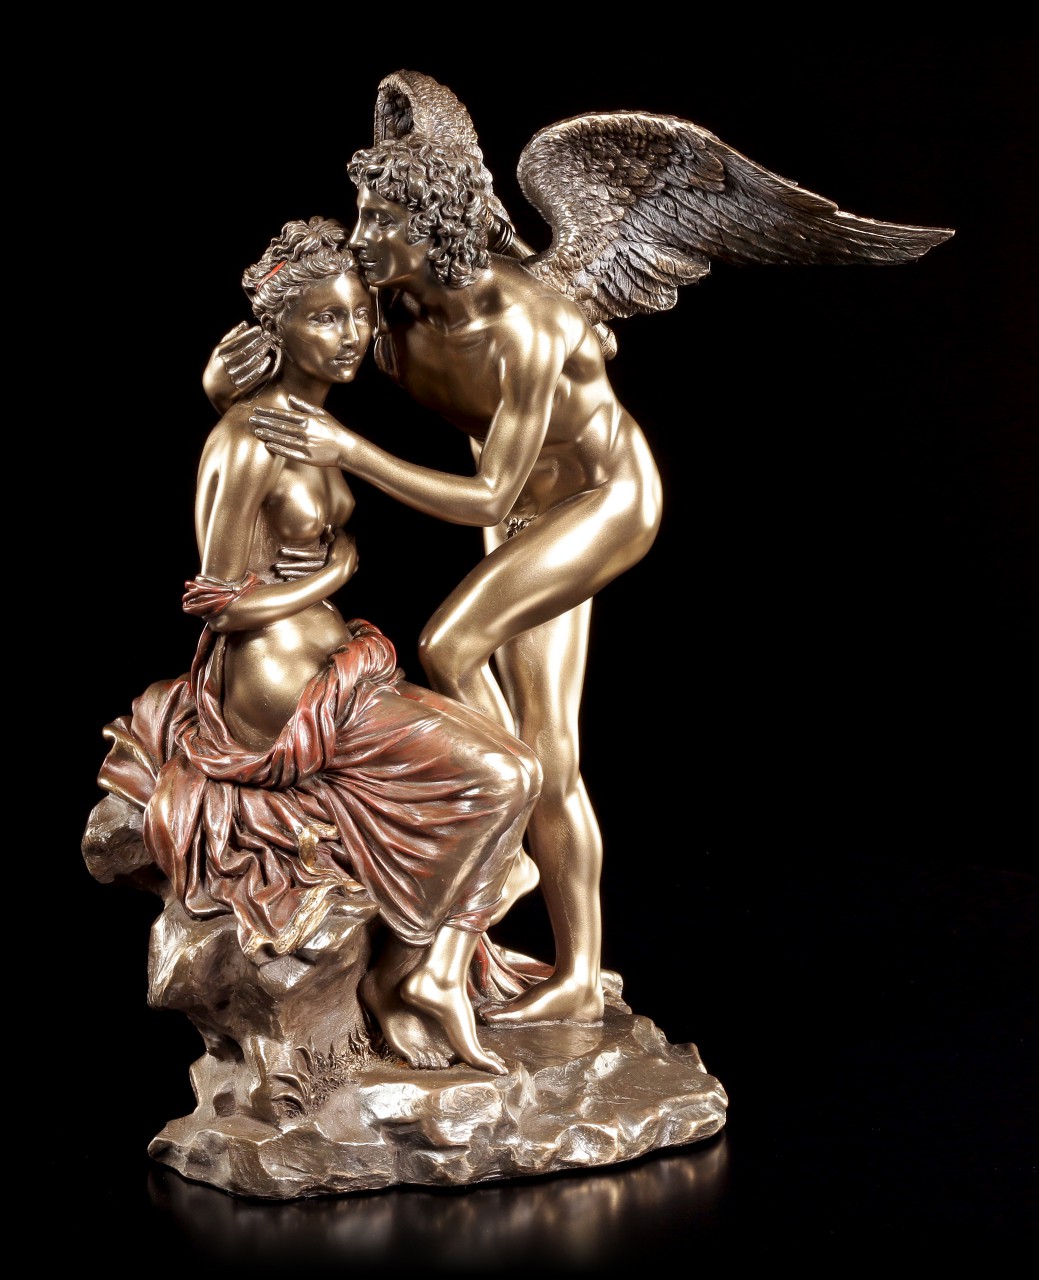 Psyche Receiving Cupid's First Kiss Figurine by Francois-Grard